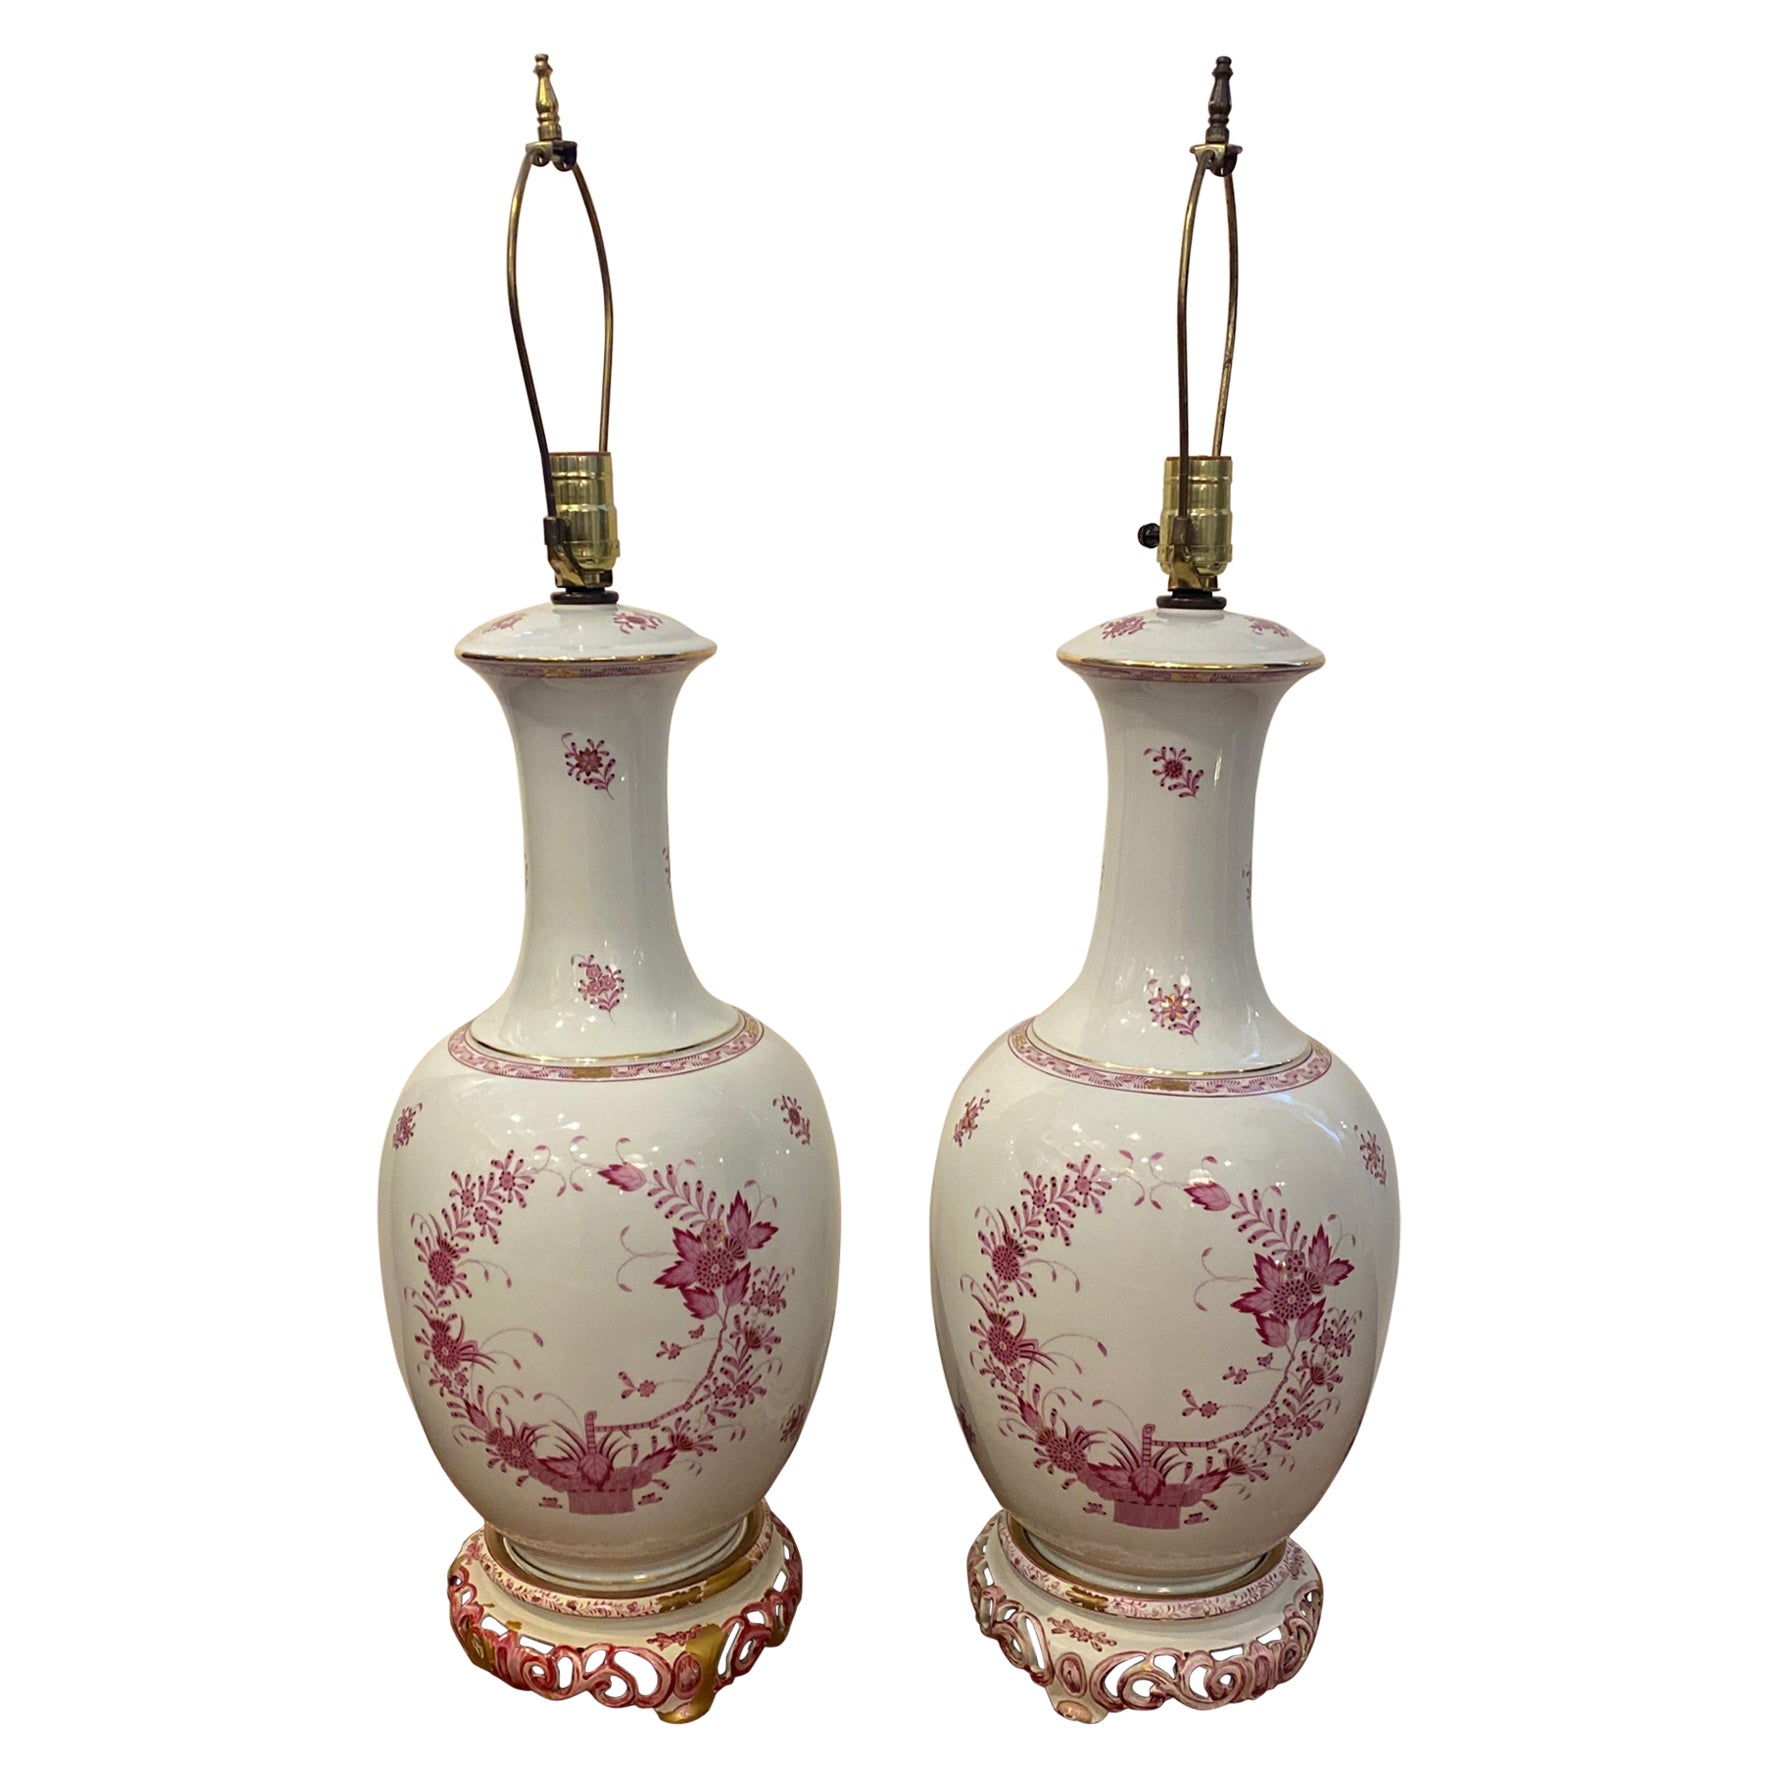 Pair of Pink Floral White Porcelain Lamps by Herrand For Sale